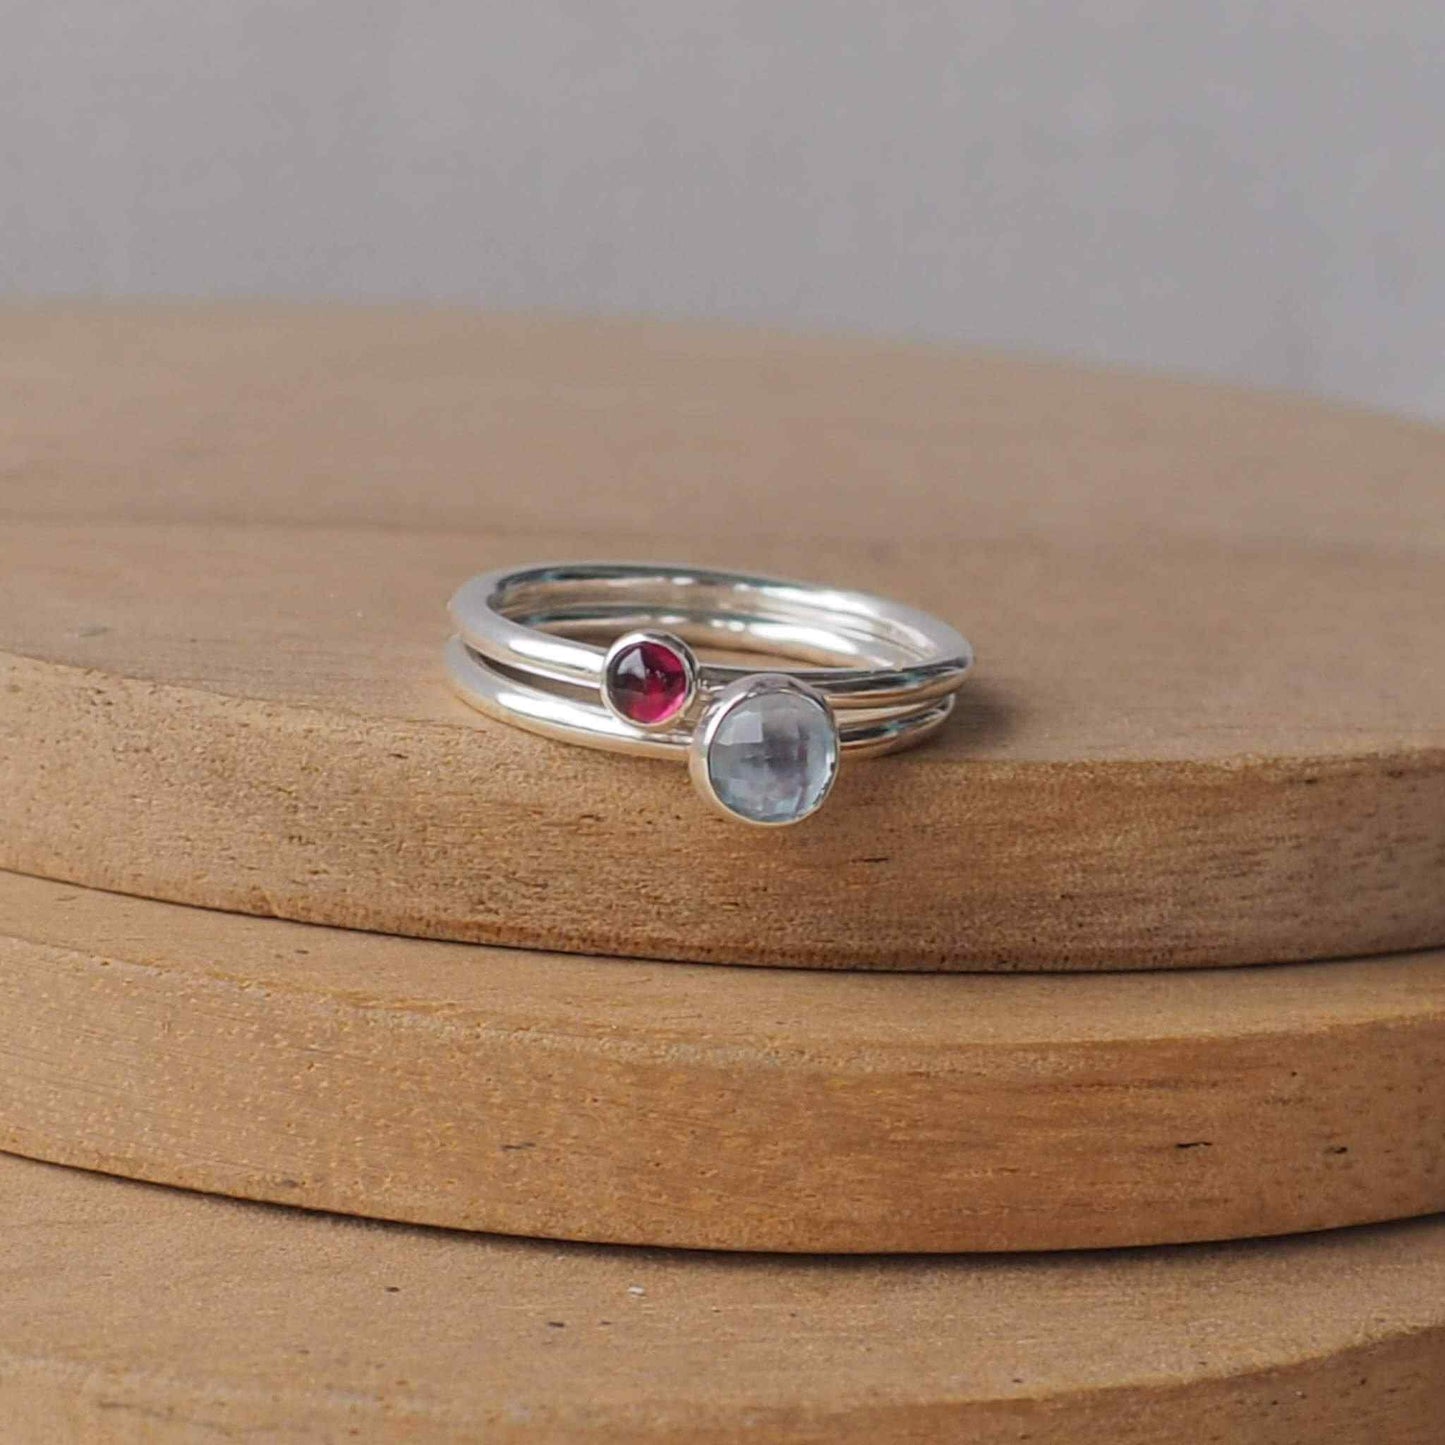 Two Birthstone Ring set with Blue Topaz and Garnet  to mark March and January Birthdays. The two rings are made with Sterling Silver and a 5mm blue round cabochon, with a further ring with 3mm round gem in a dark red garnet . Handmade in Scotland by maram jewellery